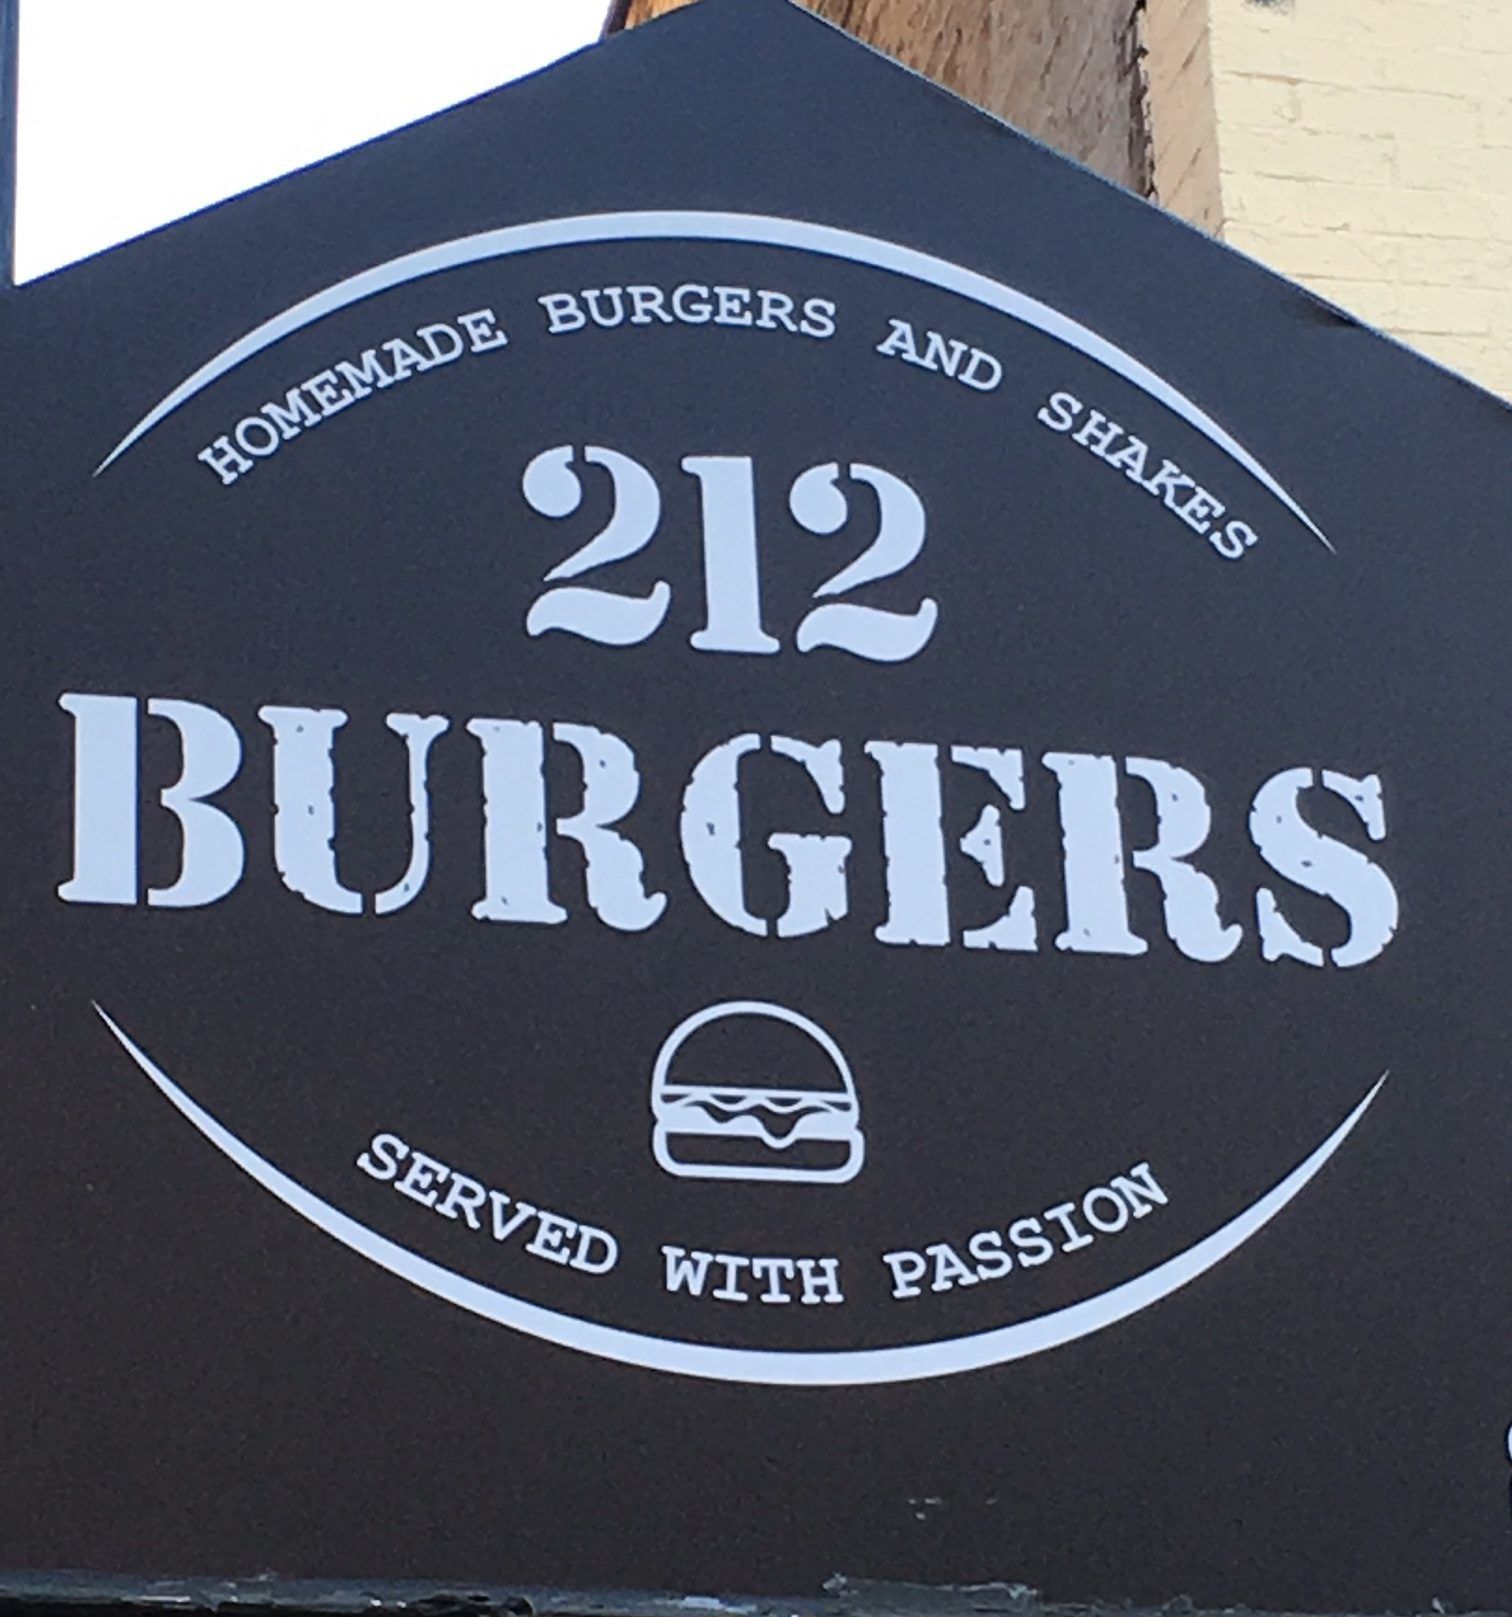 Calling All Customers: 212 Burgers Opens In Brooklyn